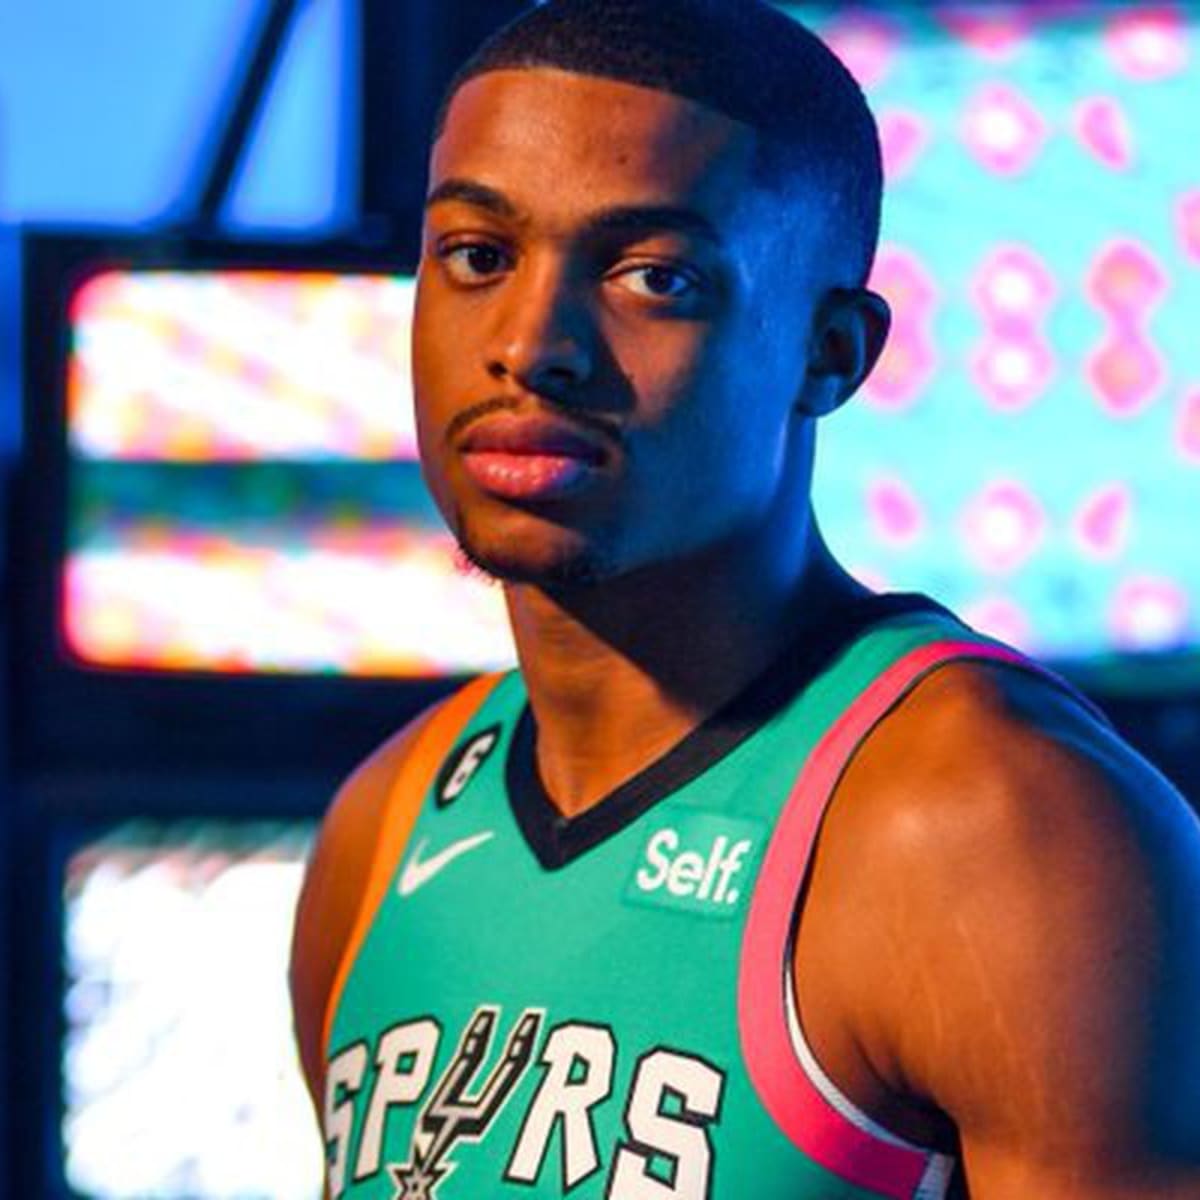 I'd Buy This Spurs Fiesta Colors Jersey So Hard - Page 5